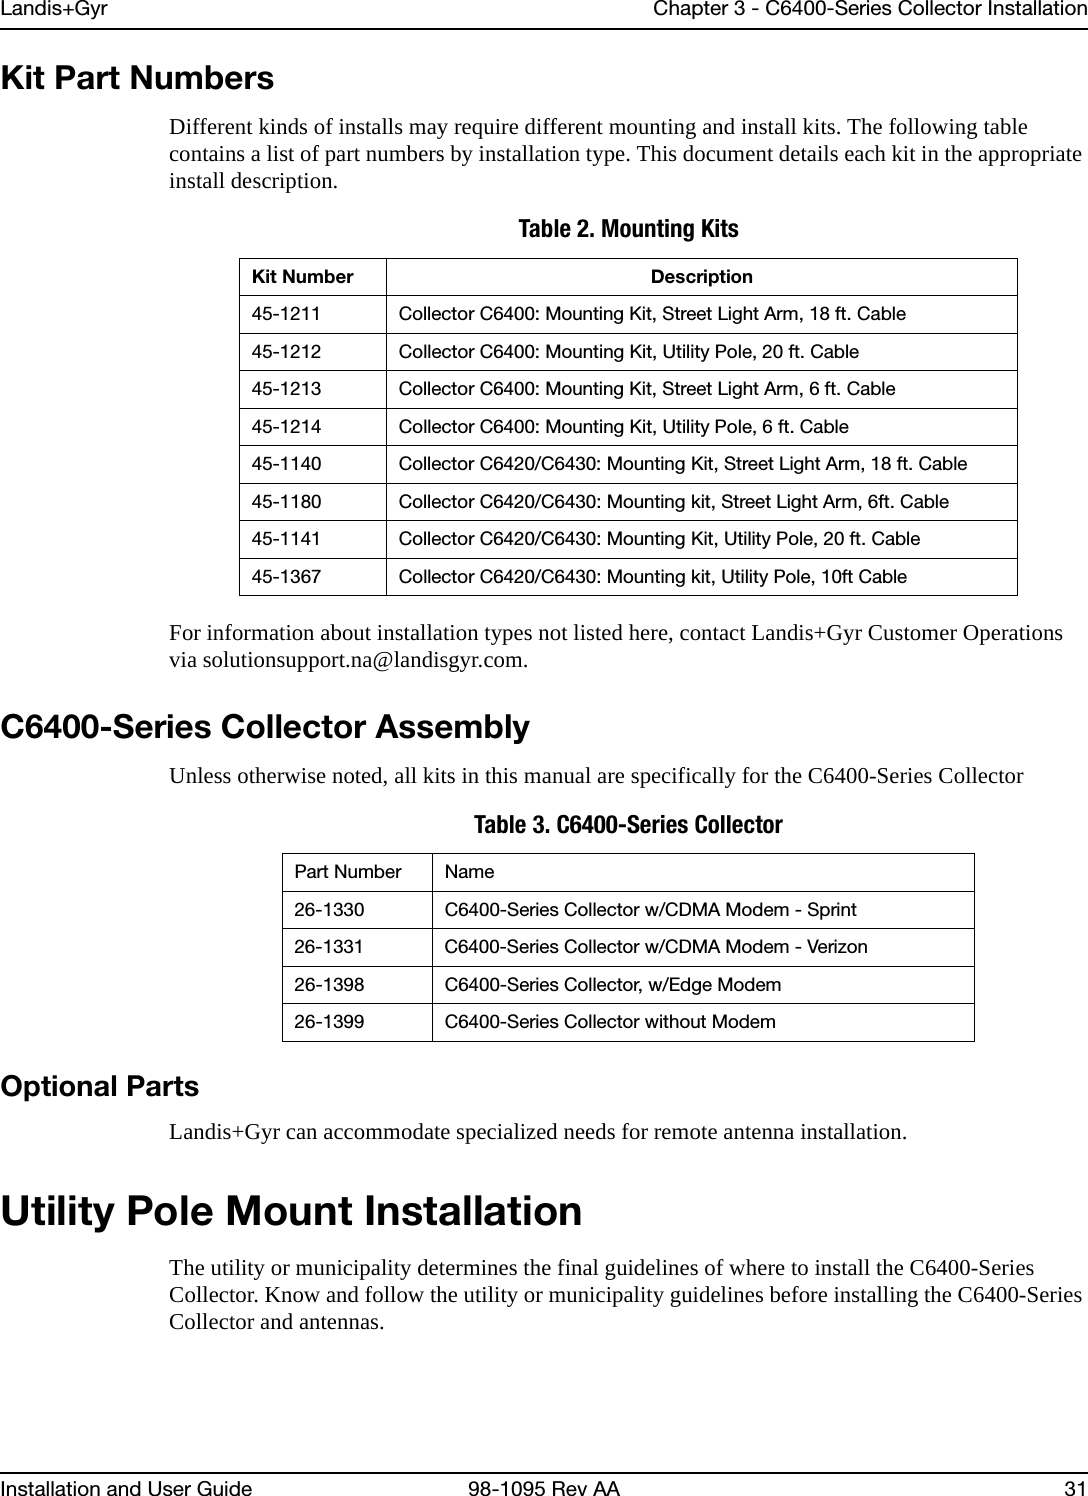 Landis+Gyr Chapter 3 - C6400-Series Collector InstallationInstallation and User Guide 98-1095 Rev AA 31Kit Part NumbersDifferent kinds of installs may require different mounting and install kits. The following table contains a list of part numbers by installation type. This document details each kit in the appropriate install description.For information about installation types not listed here, contact Landis+Gyr Customer Operations via solutionsupport.na@landisgyr.com.C6400-Series Collector AssemblyUnless otherwise noted, all kits in this manual are specifically for the C6400-Series Collector Optional PartsLandis+Gyr can accommodate specialized needs for remote antenna installation.Utility Pole Mount InstallationThe utility or municipality determines the final guidelines of where to install the C6400-Series Collector. Know and follow the utility or municipality guidelines before installing the C6400-Series Collector and antennas.Table 2. Mounting KitsKit Number Description45-1211 Collector C6400: Mounting Kit, Street Light Arm, 18 ft. Cable45-1212 Collector C6400: Mounting Kit, Utility Pole, 20 ft. Cable45-1213 Collector C6400: Mounting Kit, Street Light Arm, 6 ft. Cable45-1214 Collector C6400: Mounting Kit, Utility Pole, 6 ft. Cable45-1140  Collector C6420/C6430: Mounting Kit, Street Light Arm, 18 ft. Cable45-1180 Collector C6420/C6430: Mounting kit, Street Light Arm, 6ft. Cable45-1141 Collector C6420/C6430: Mounting Kit, Utility Pole, 20 ft. Cable45-1367 Collector C6420/C6430: Mounting kit, Utility Pole, 10ft CableTable 3. C6400-Series CollectorPart Number Name26-1330 C6400-Series Collector w/CDMA Modem - Sprint26-1331 C6400-Series Collector w/CDMA Modem - Verizon26-1398 C6400-Series Collector, w/Edge Modem26-1399 C6400-Series Collector without Modem